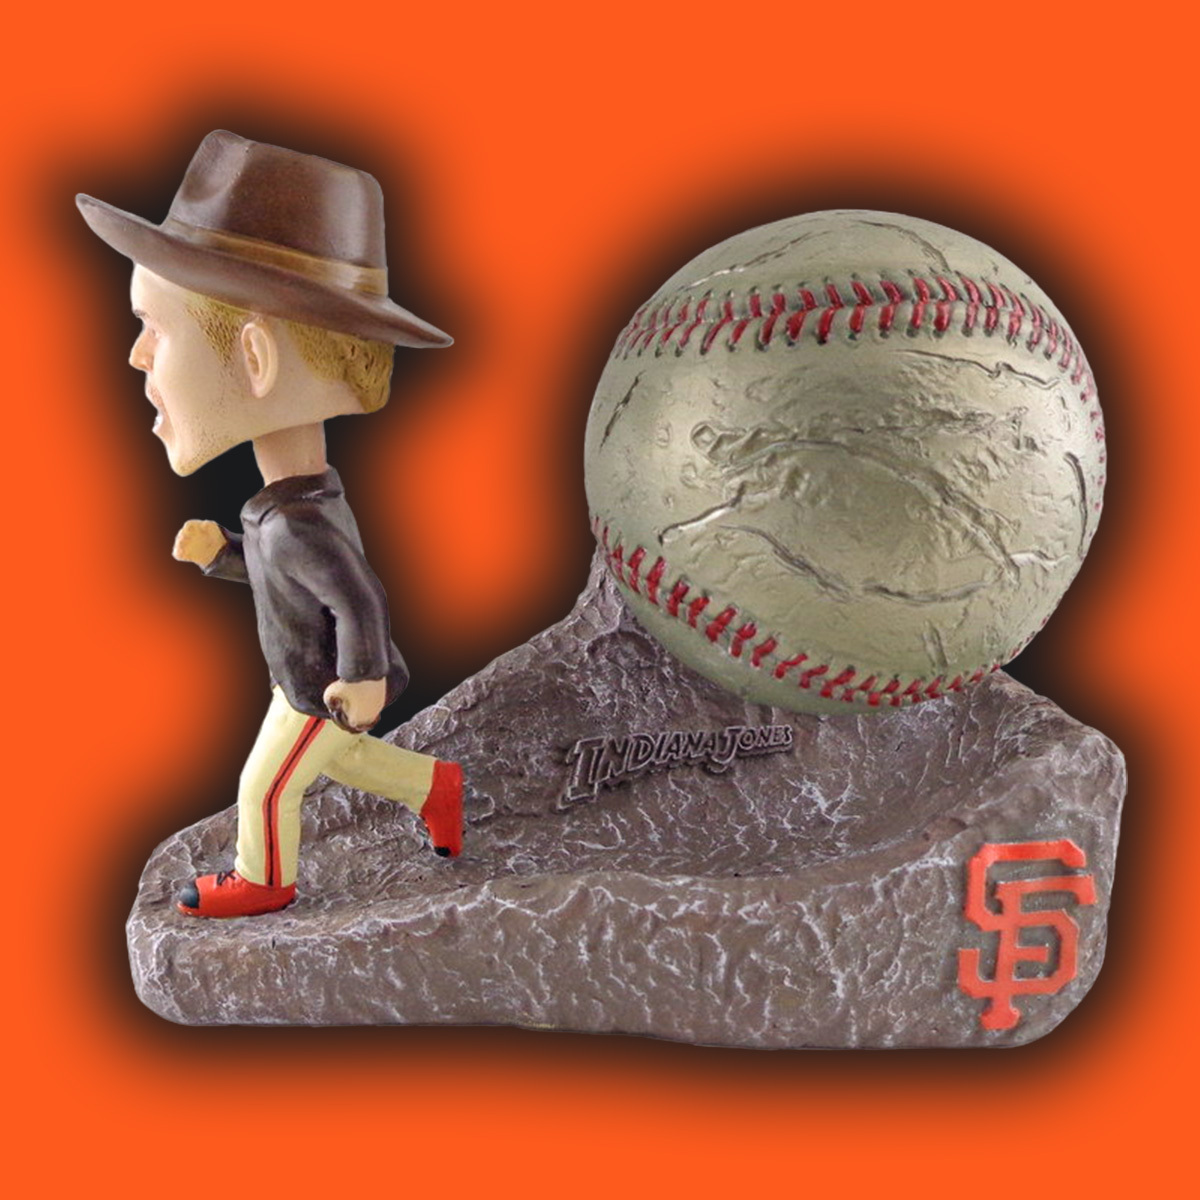 The Giants gave out this Joc Pederson bobblehead for their Indiana Jones Night 🤣